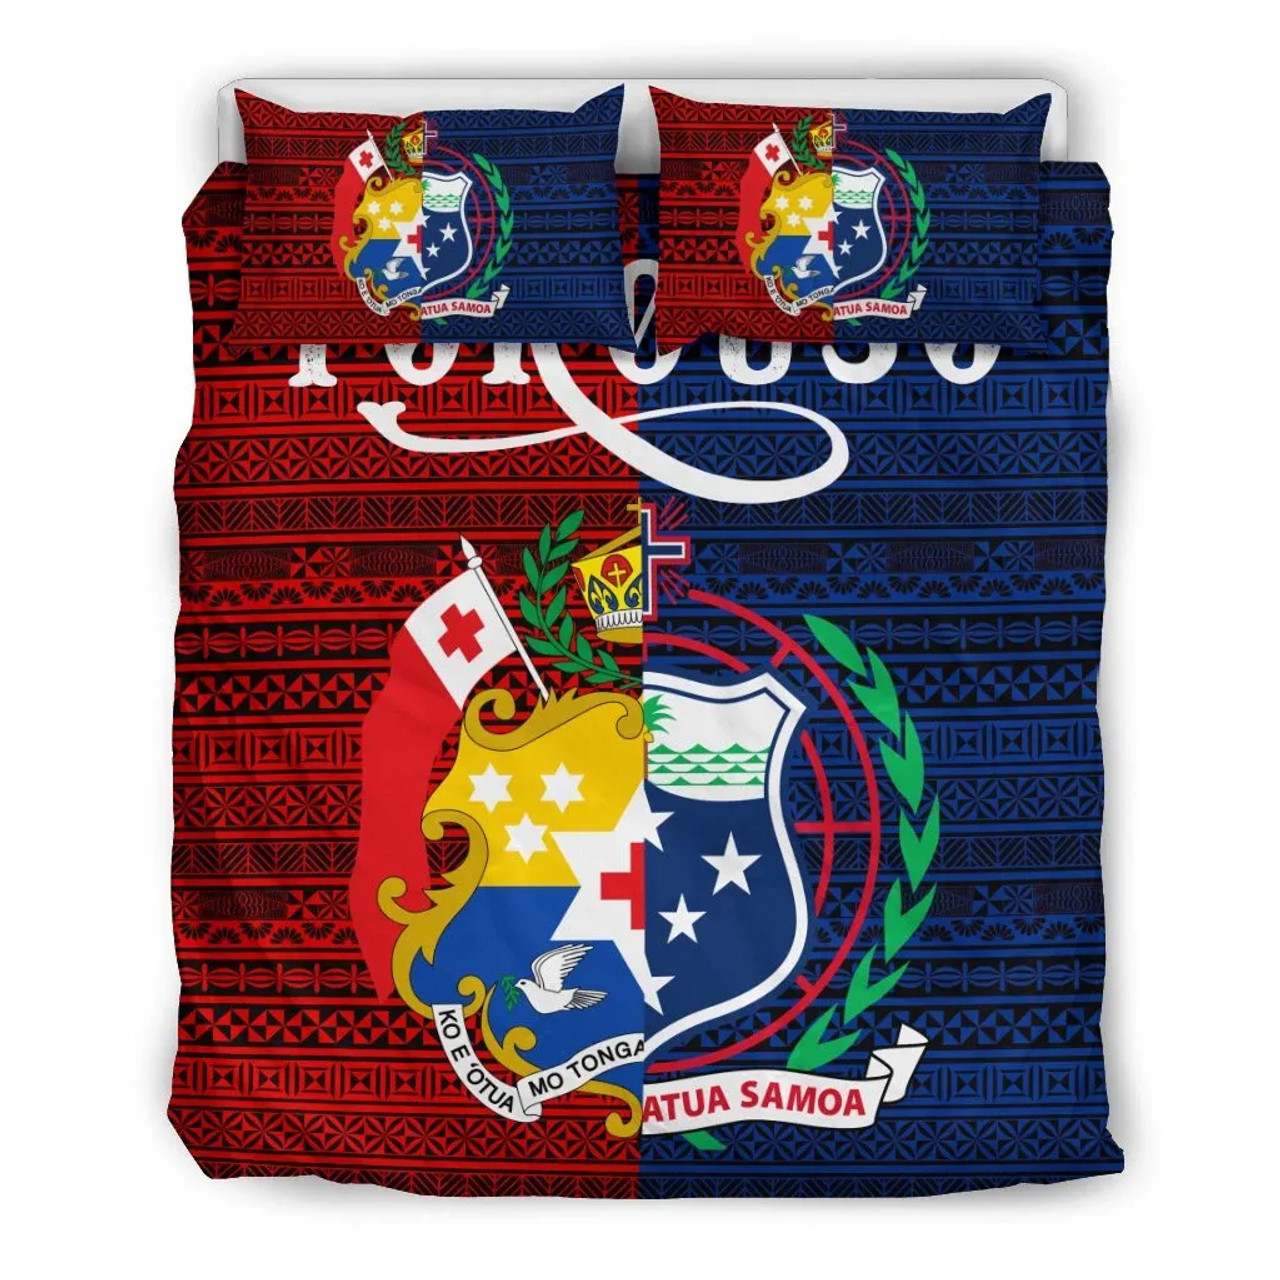 Tokouso Duvet Cover Set - Tokouso Coat Of Arms 1 2